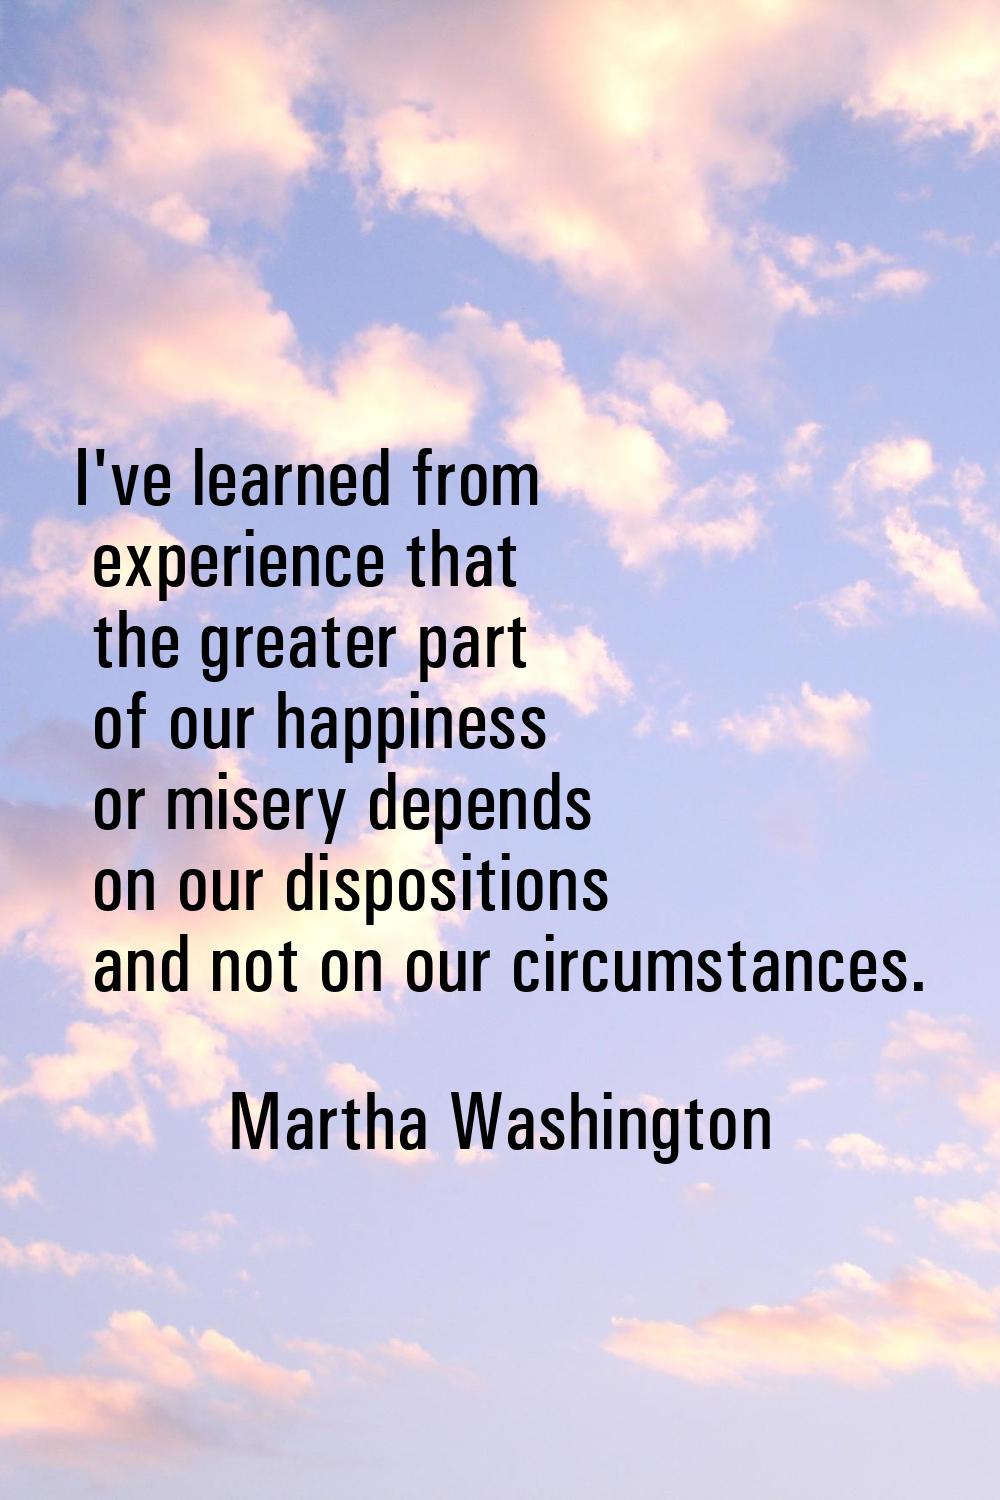 I've learned from experience that the greater part of our happiness or misery depends on our dispos